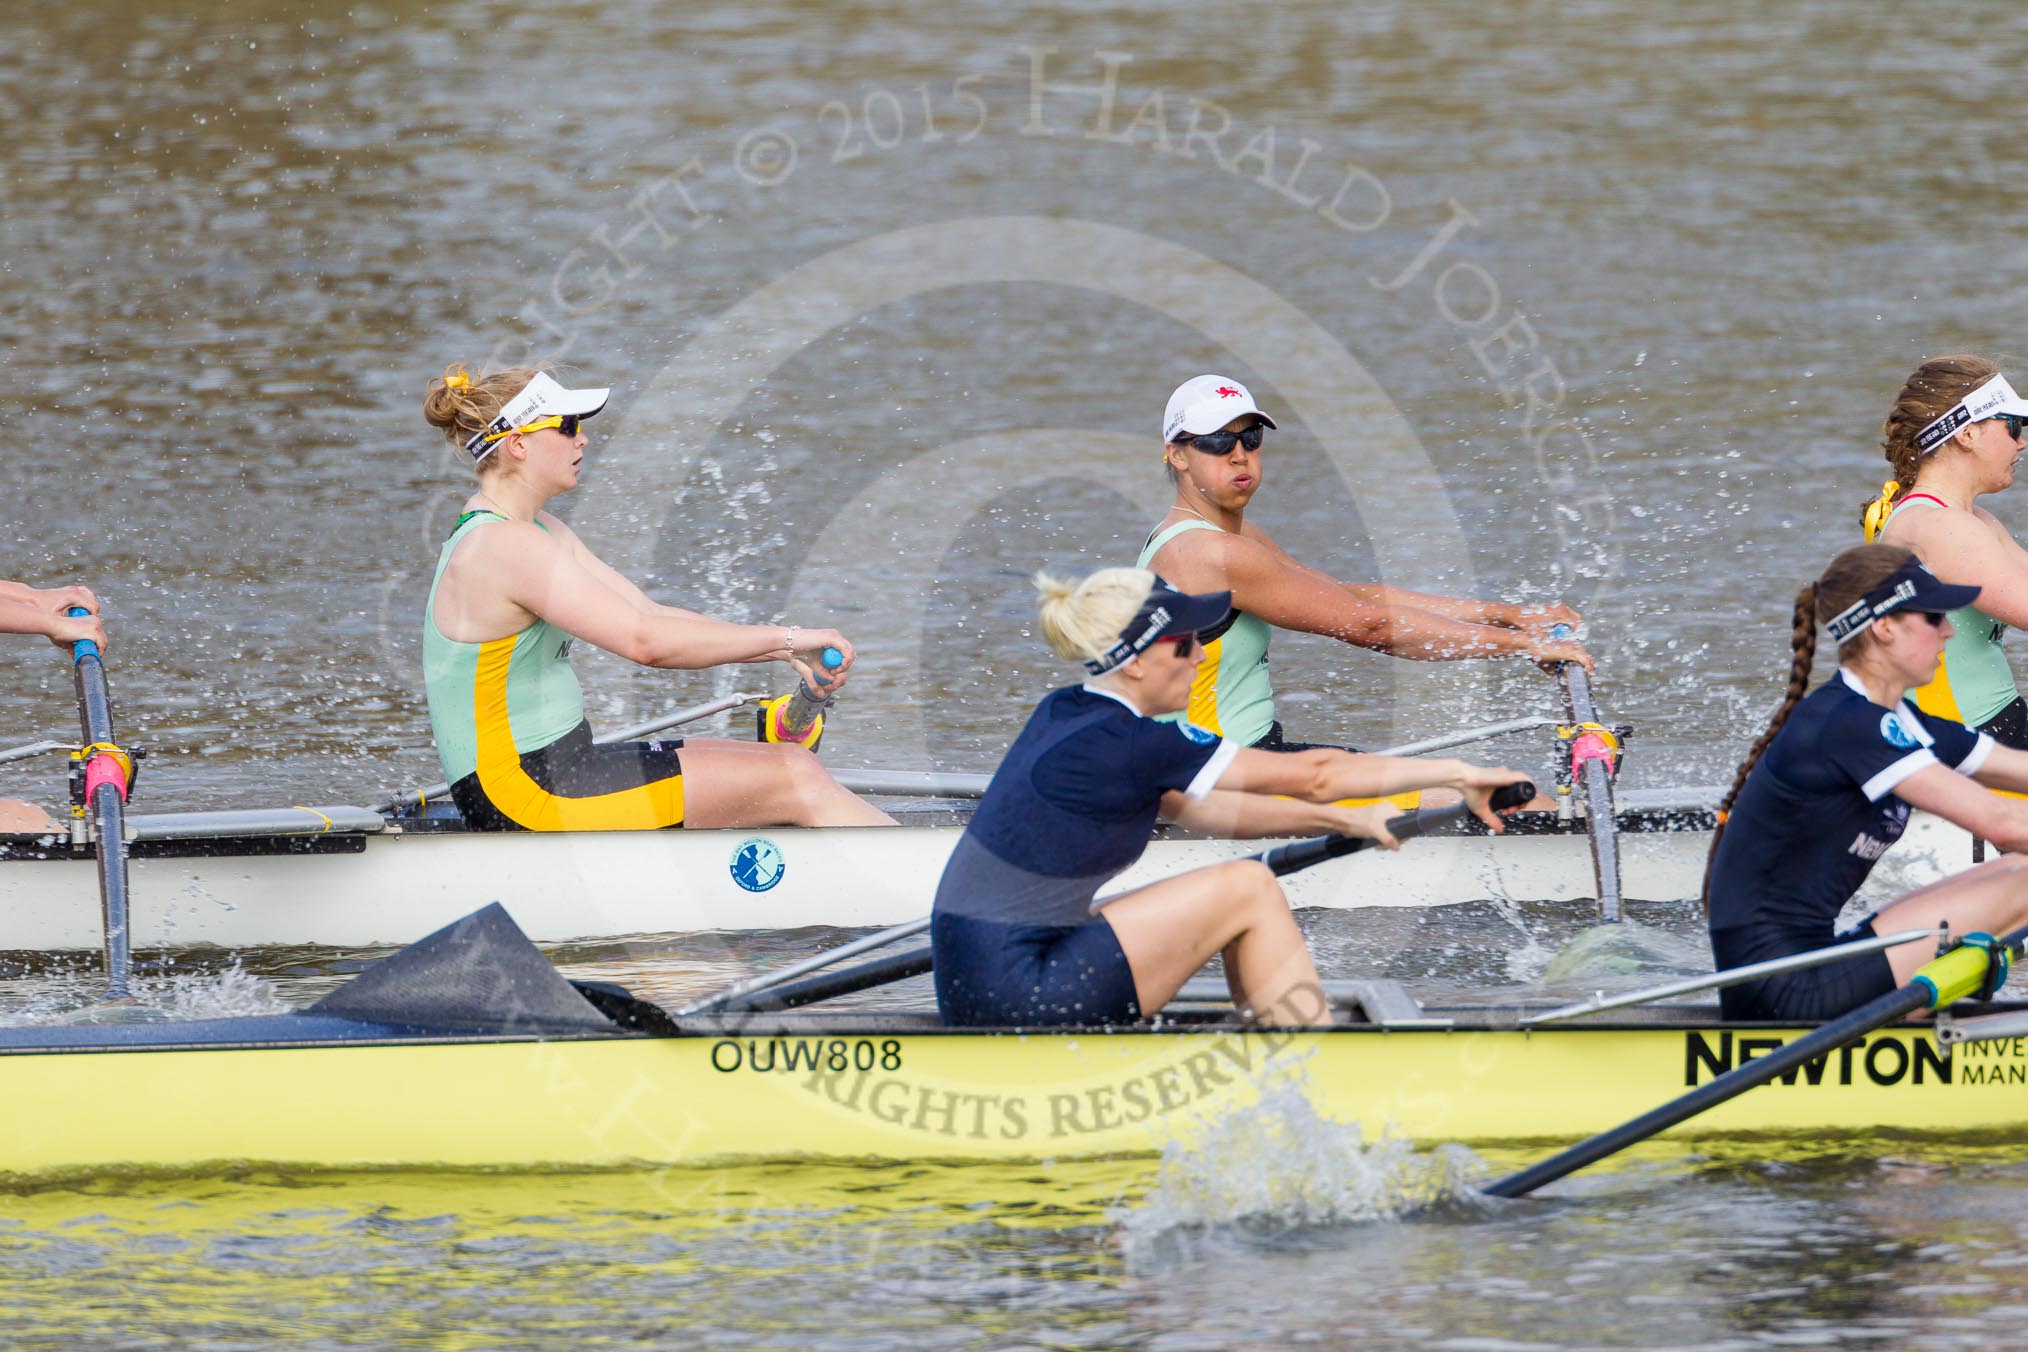 The Boat Race season 2015 - Newton Women's Boat Race.
River Thames between Putney and Mortlake,
London,

United Kingdom,
on 10 April 2015 at 16:02, image #112